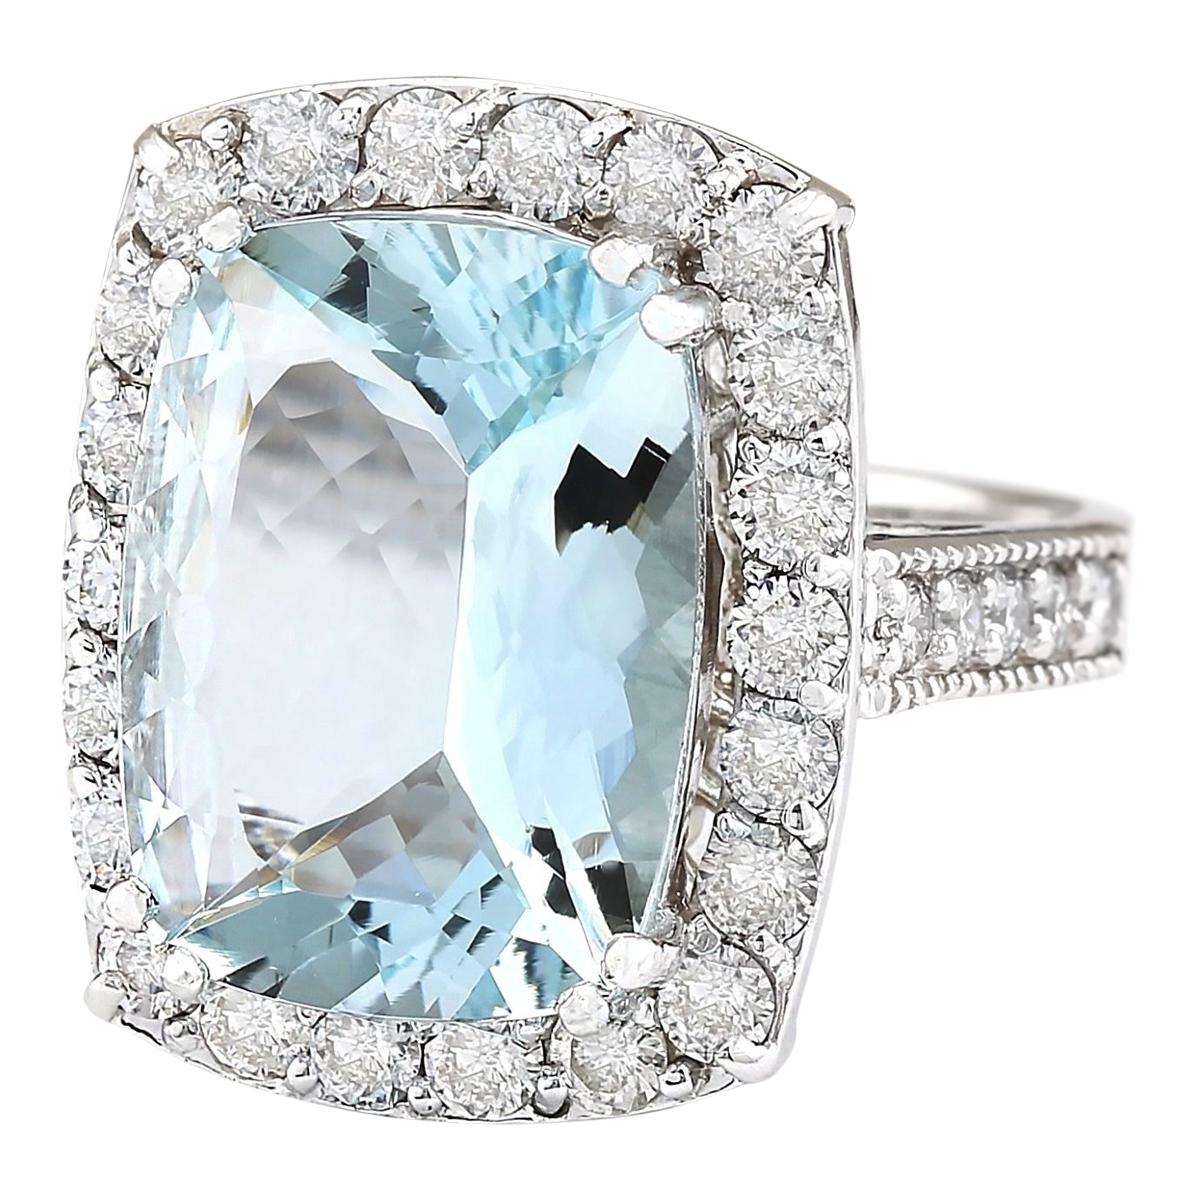 Stamped: 14K White Gold
Total Ring Weight: 7.5 Grams
Total Natural Aquamarine Weight is 7.86 Carat (Measures: 16.00x12.00 mm)
Color: Blue
Total Natural Diamond Weight is 1.50 Carat
Color: F-G, Clarity: VS2-SI1
Face Measures: 21.00x16.70 mm
Sku: